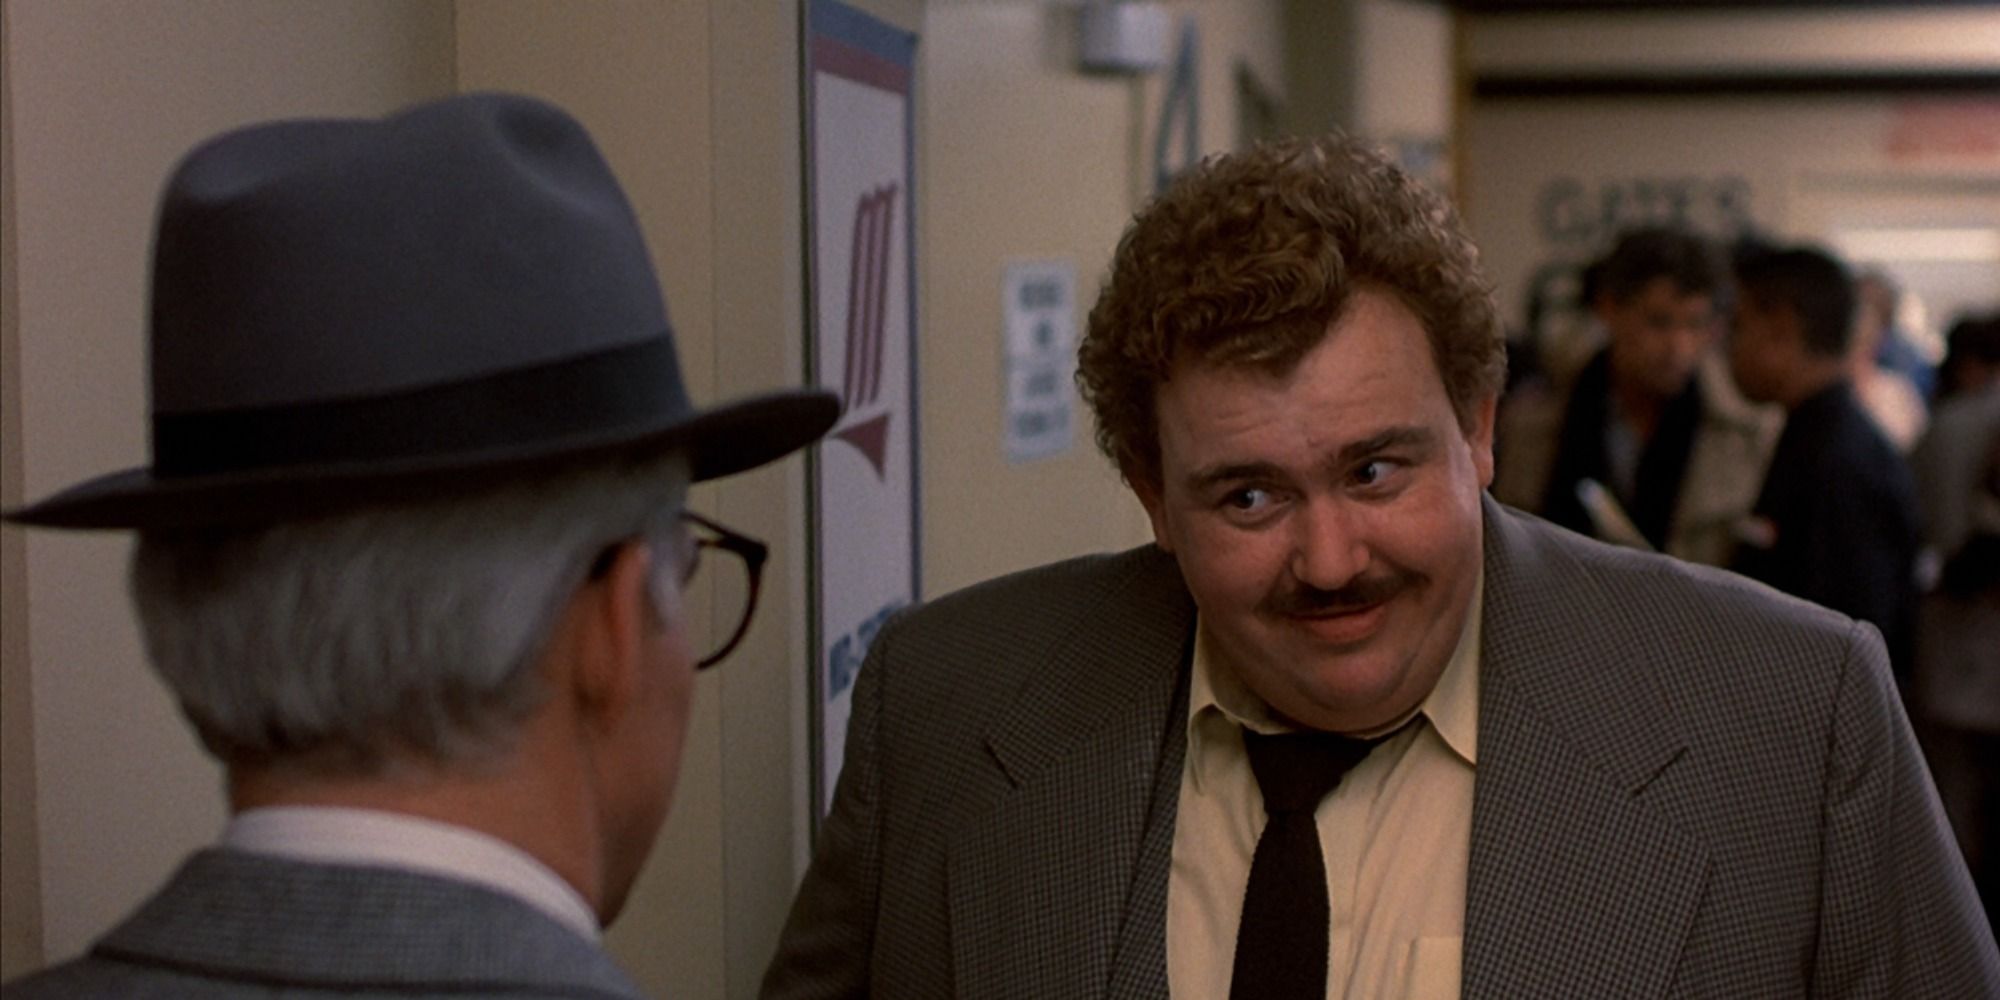 Del talking to Neal at the Wichita airport in Planes, Trains and Automobiles